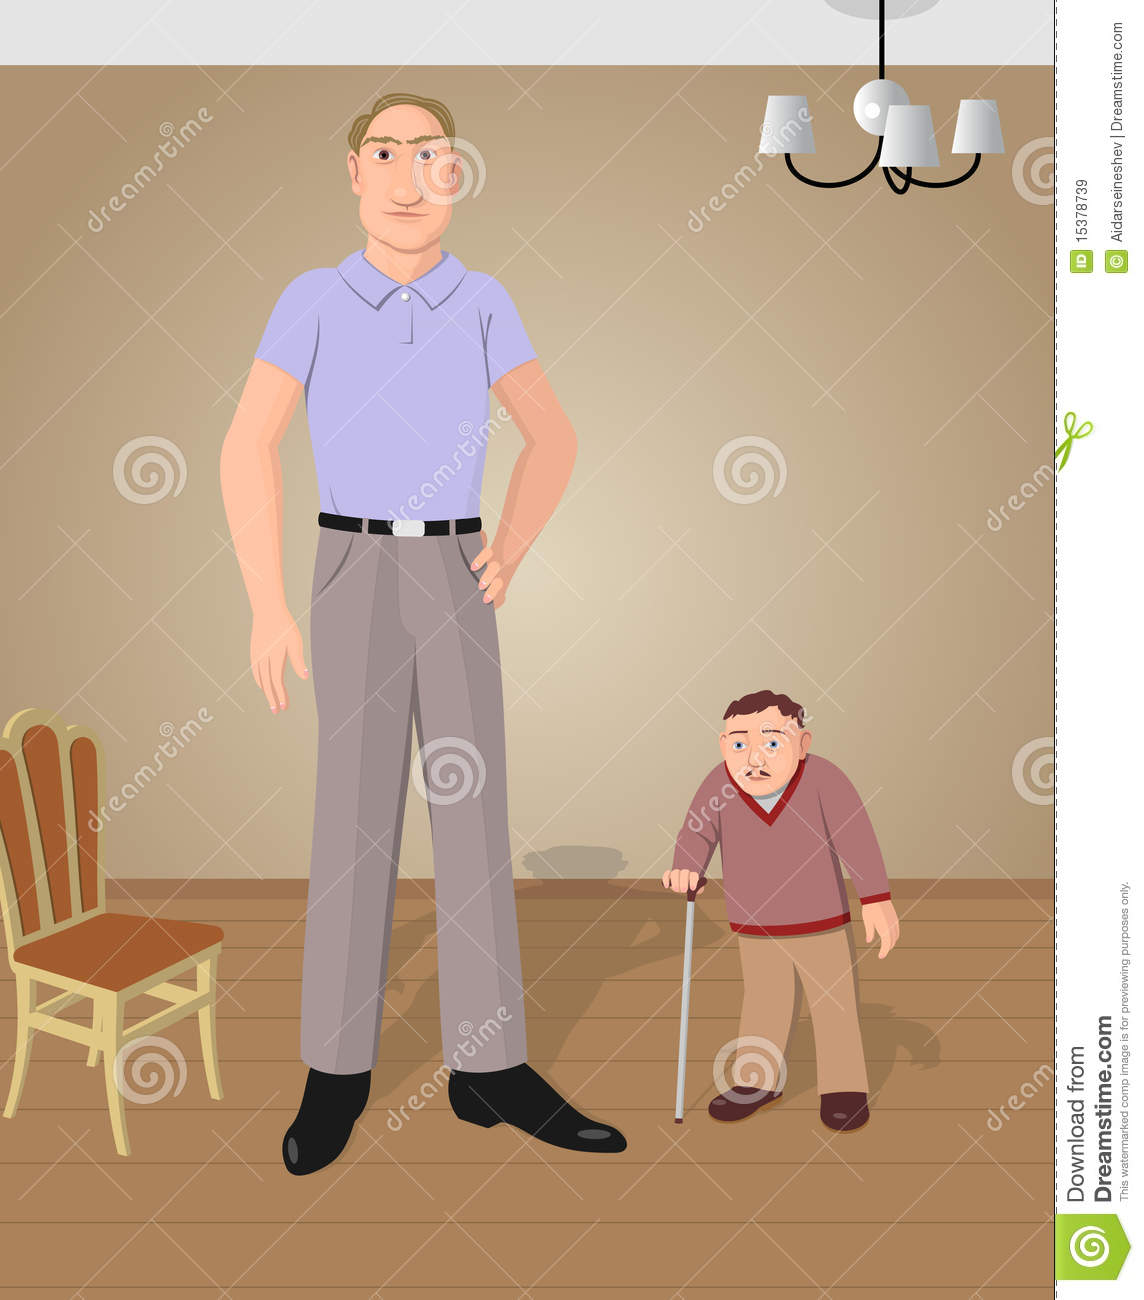     Short Vs Tall Clipart Displaying 20 Images For Short Vs Tall Clipart